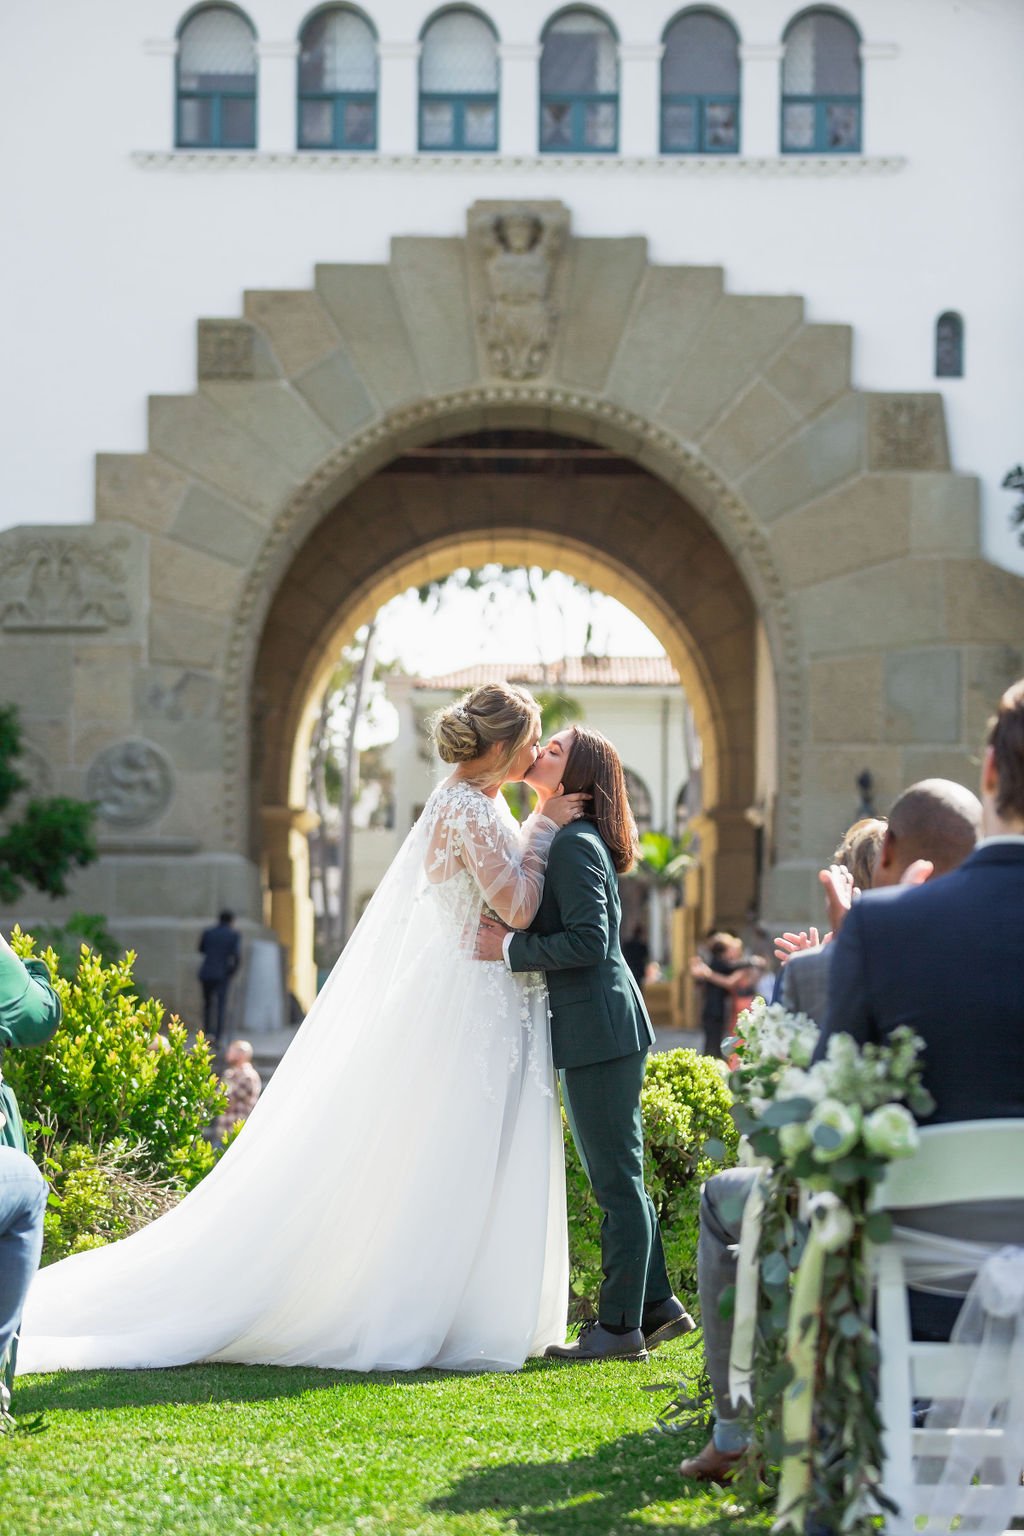 www.santabarbarawedding.com | Weddings by the Sea | Santa Barbara Courthouse | Kevin Qian | Cate Forest Designs | Jen Simone | Wendy Brewer | The Ceremony 